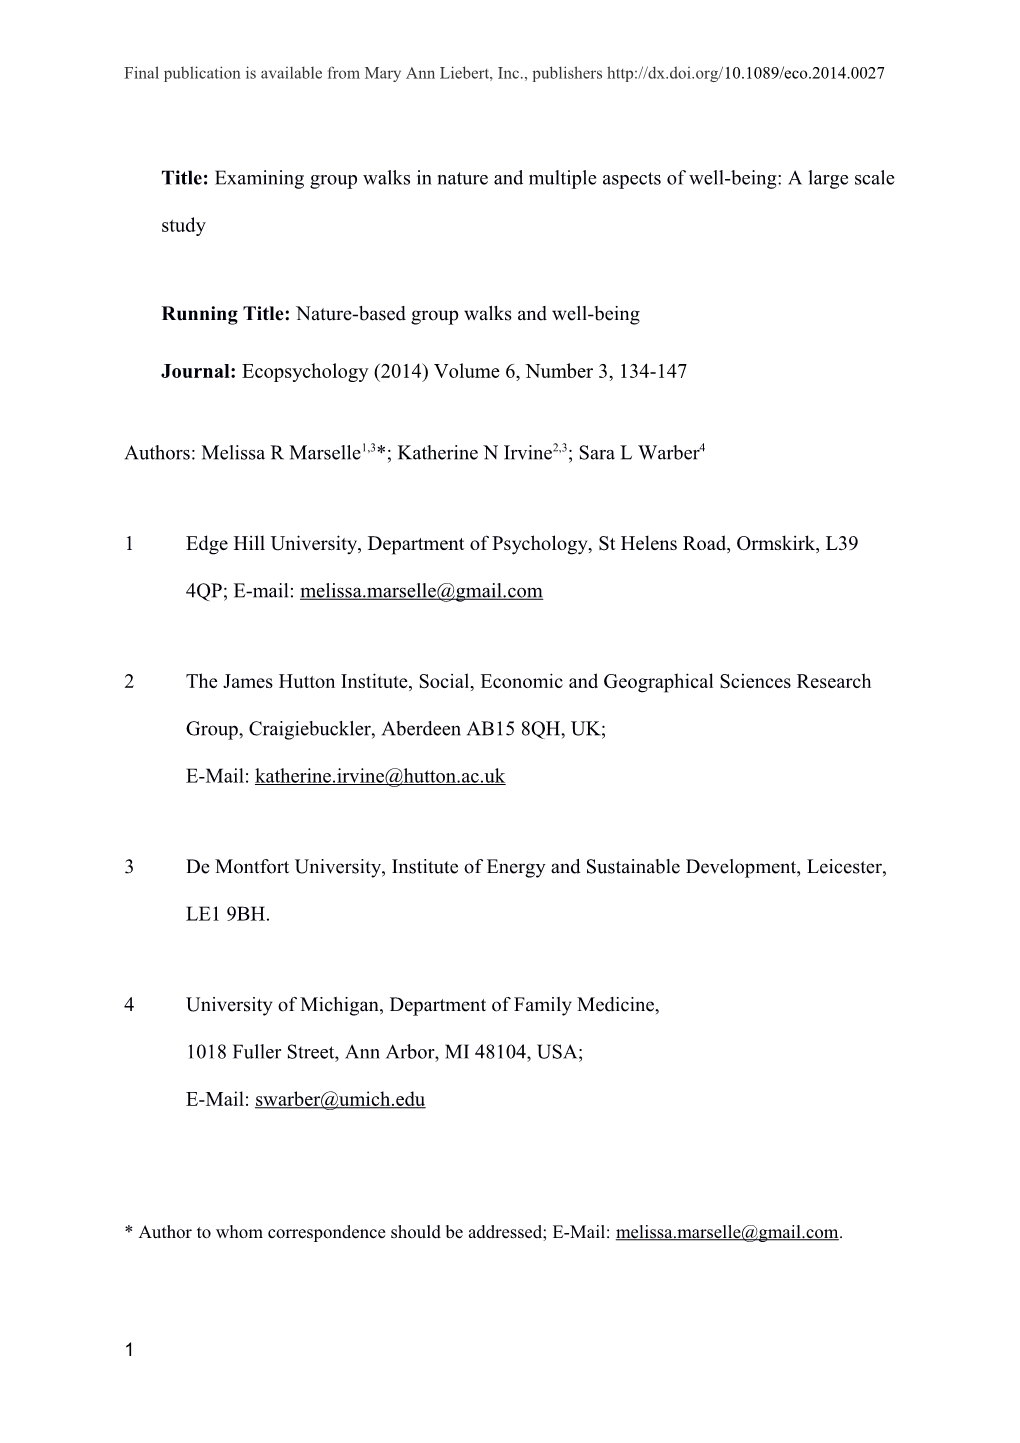 REVISION Ecopsychology Finalsubmission 17March2014